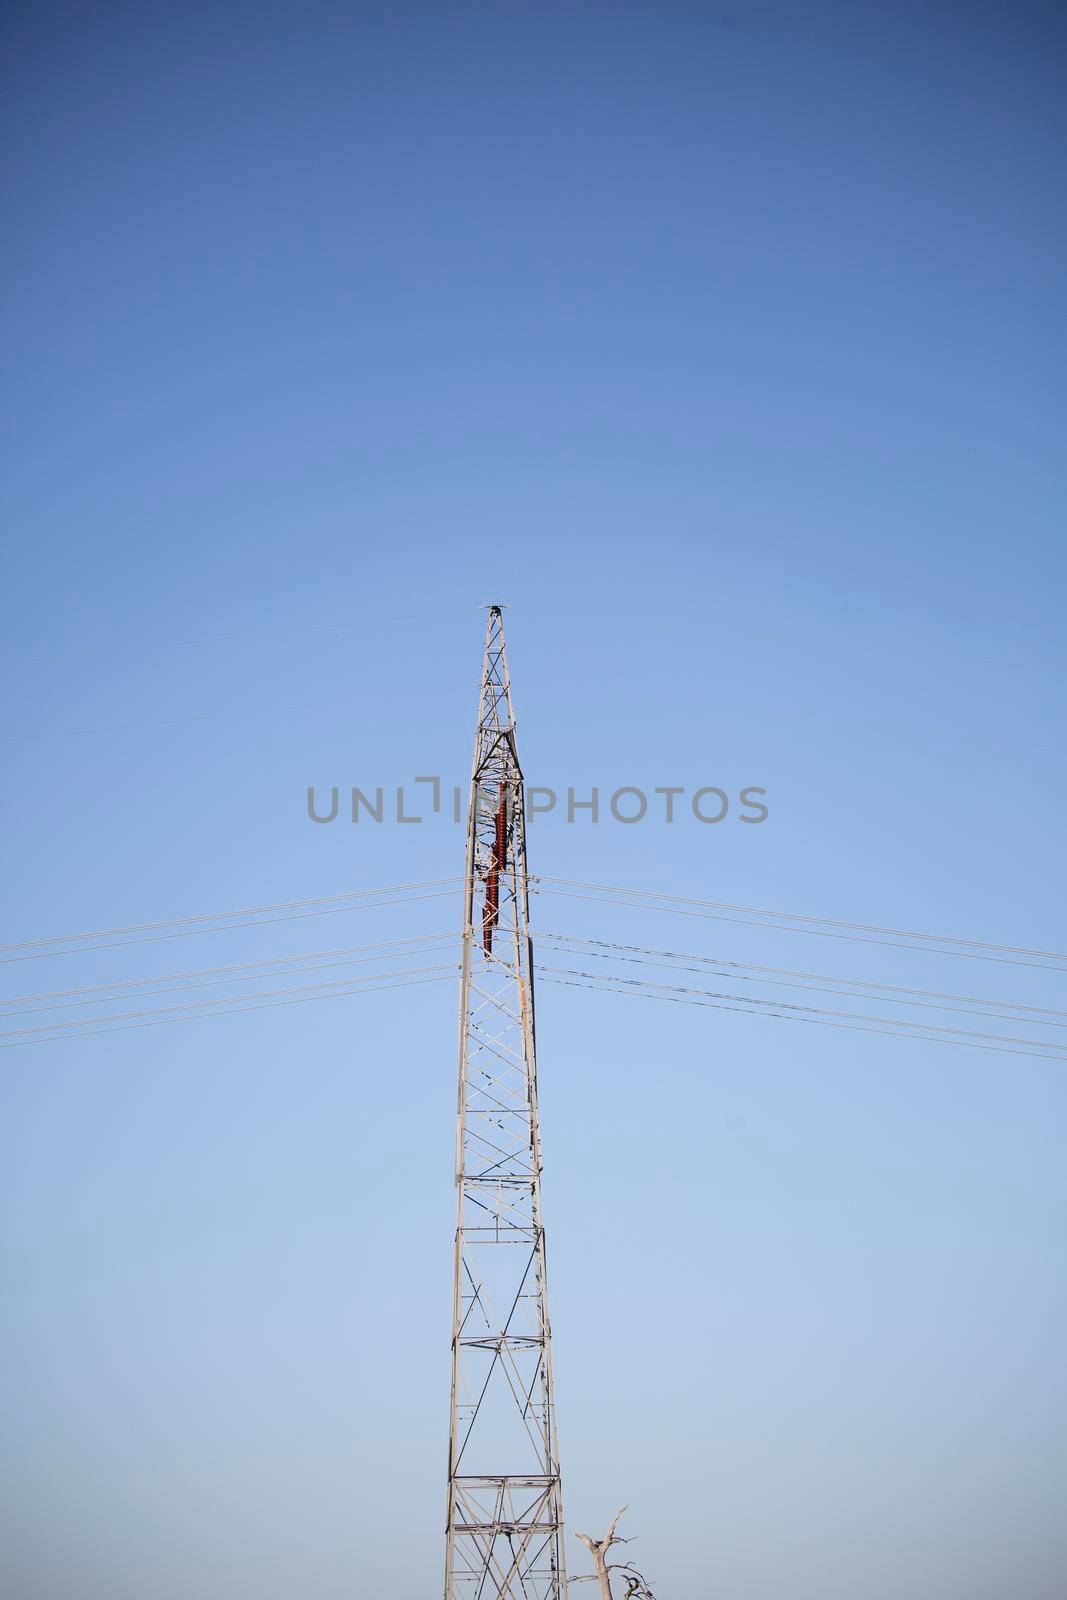 Electrical Tower and Wires by tornado98